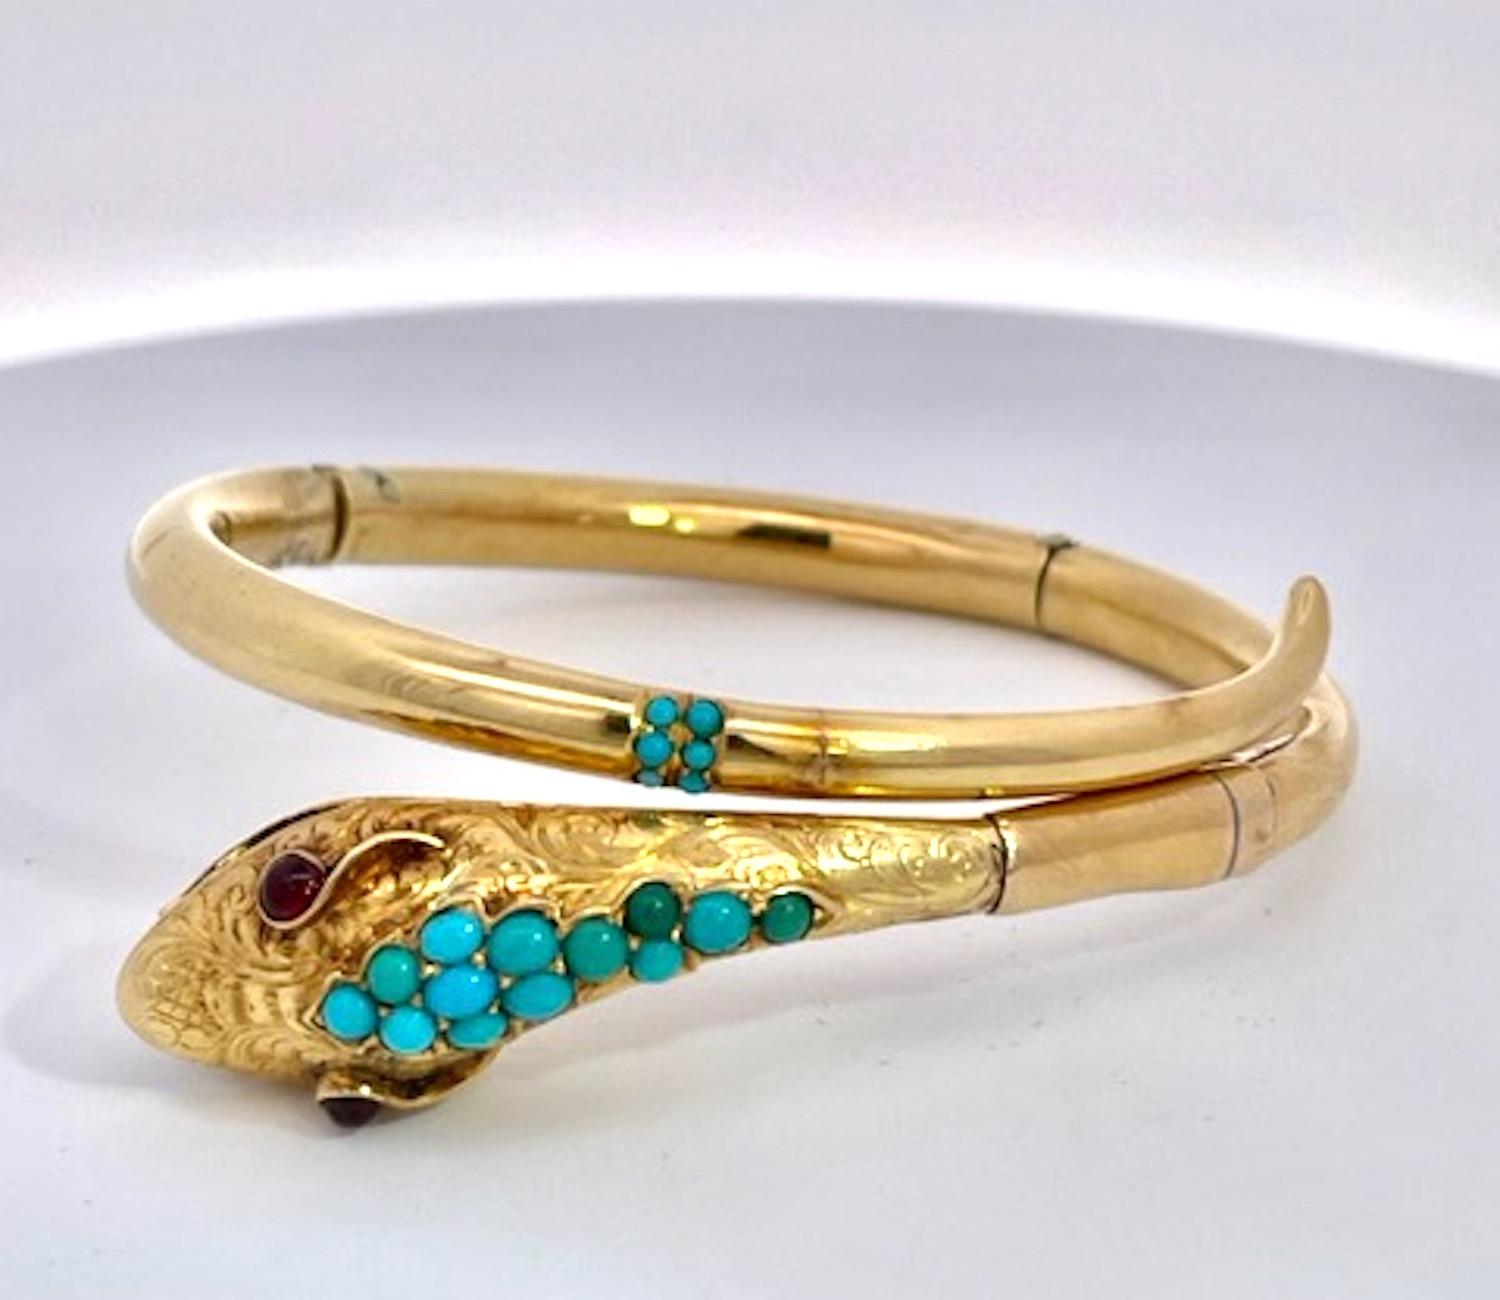 Here we go another beautiful Snake Bracelet.
This one is done in 14K yellow Gold and adorned with Gorgeous (persian) Turquoise beads on the head and a few scattered around the tail.  This bracelet is sweet and simple but packs a punch.
The face is